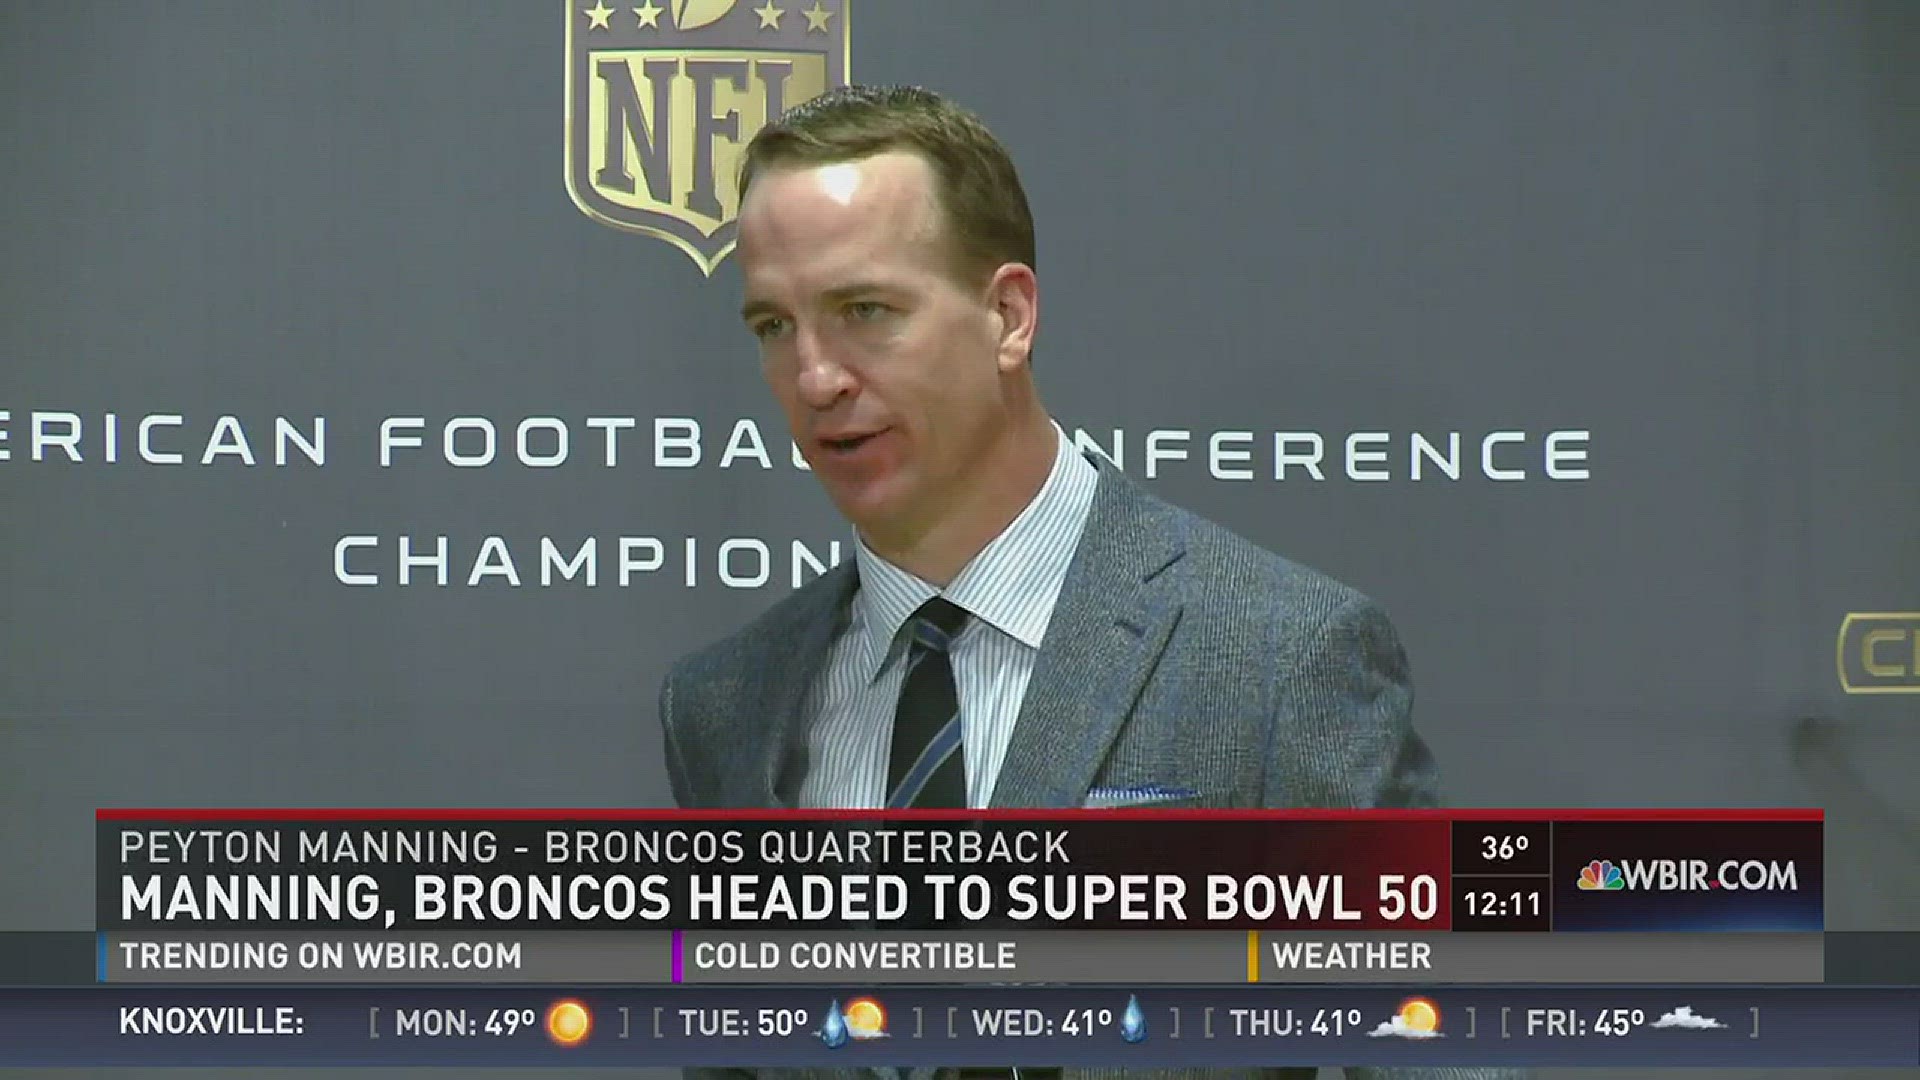 The Denver Broncos and Carolina Panthers play in Super Bowl 50 on Feb. 7.